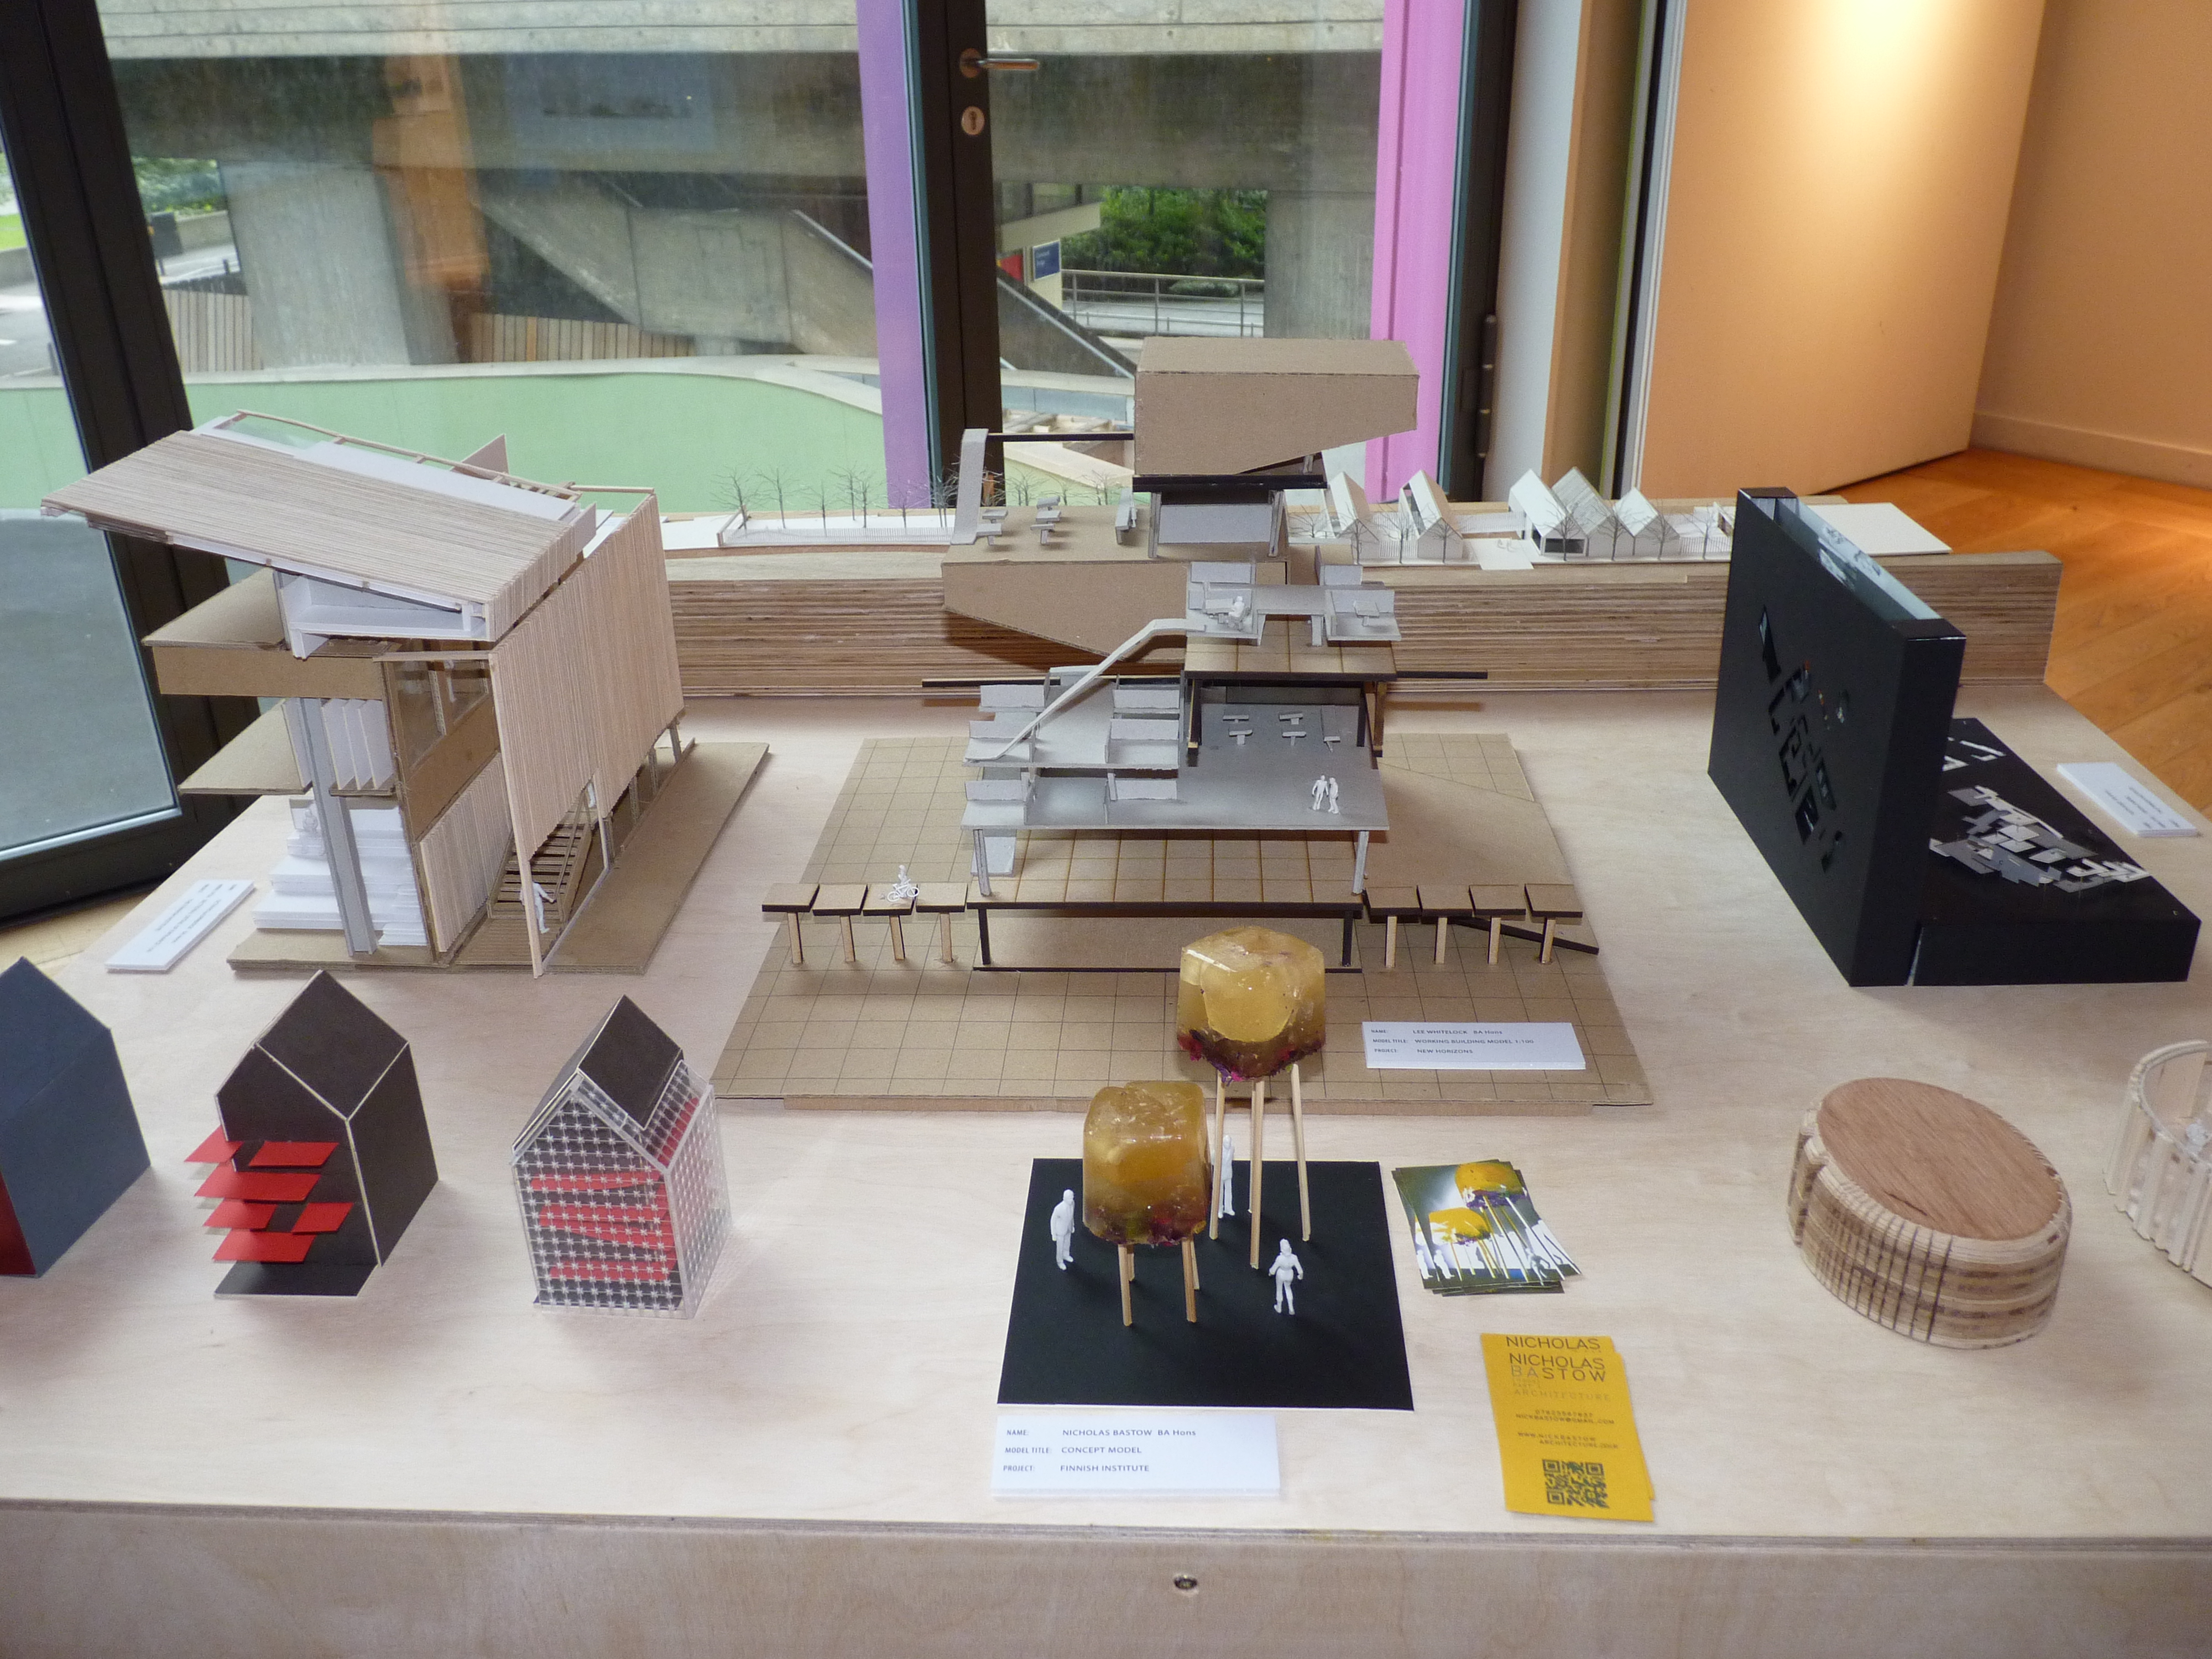 Display of student model for architecture course